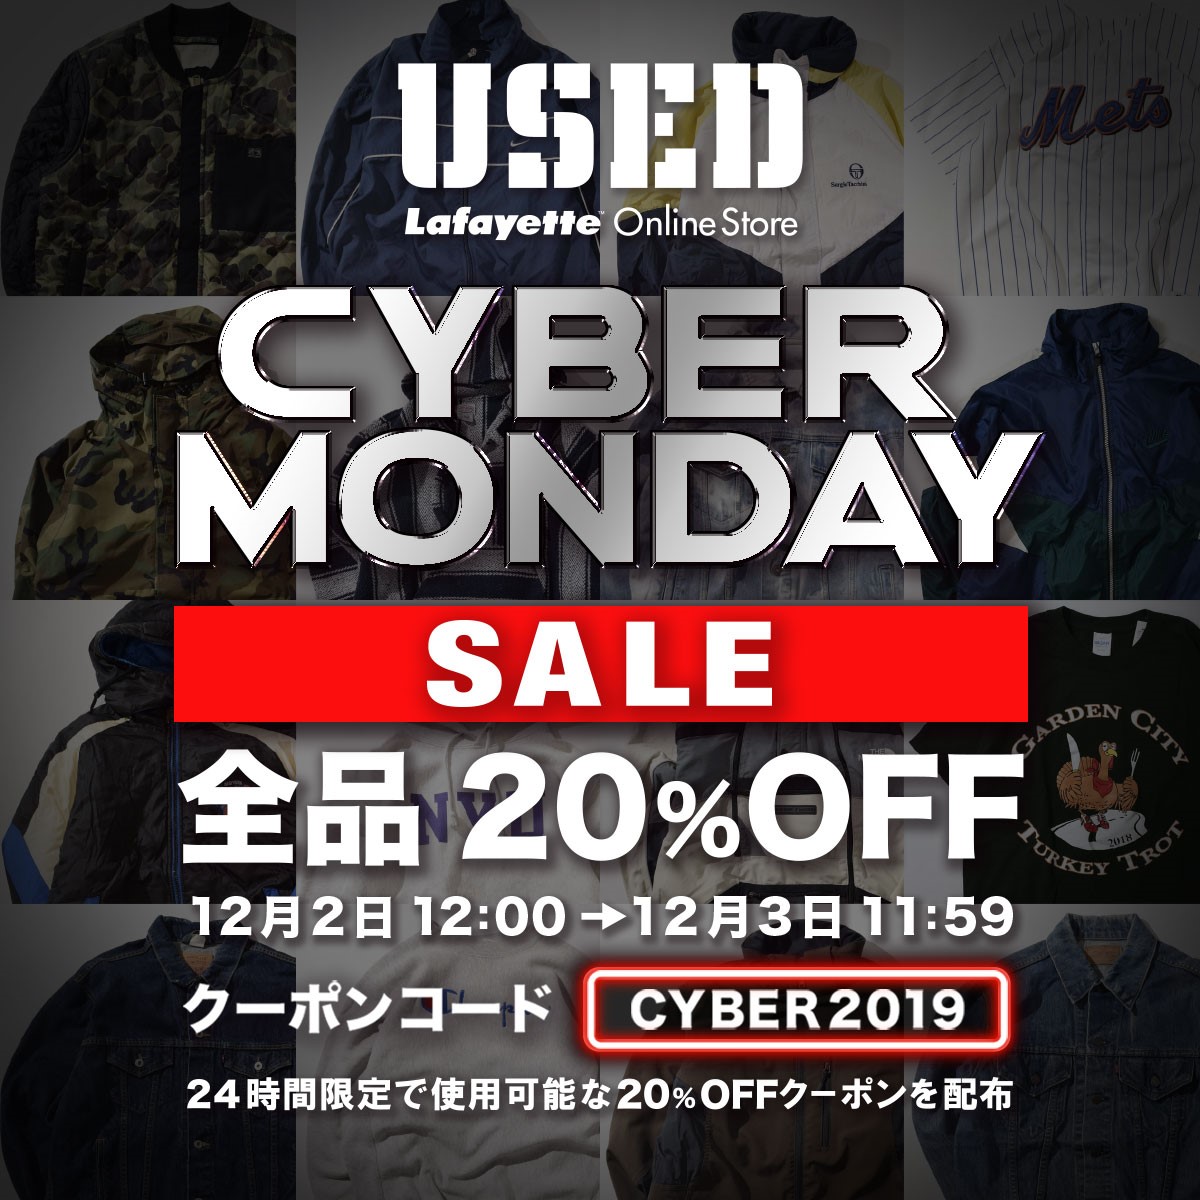 【USED】 Lafayette Online Store Cyber Monday Sale!!